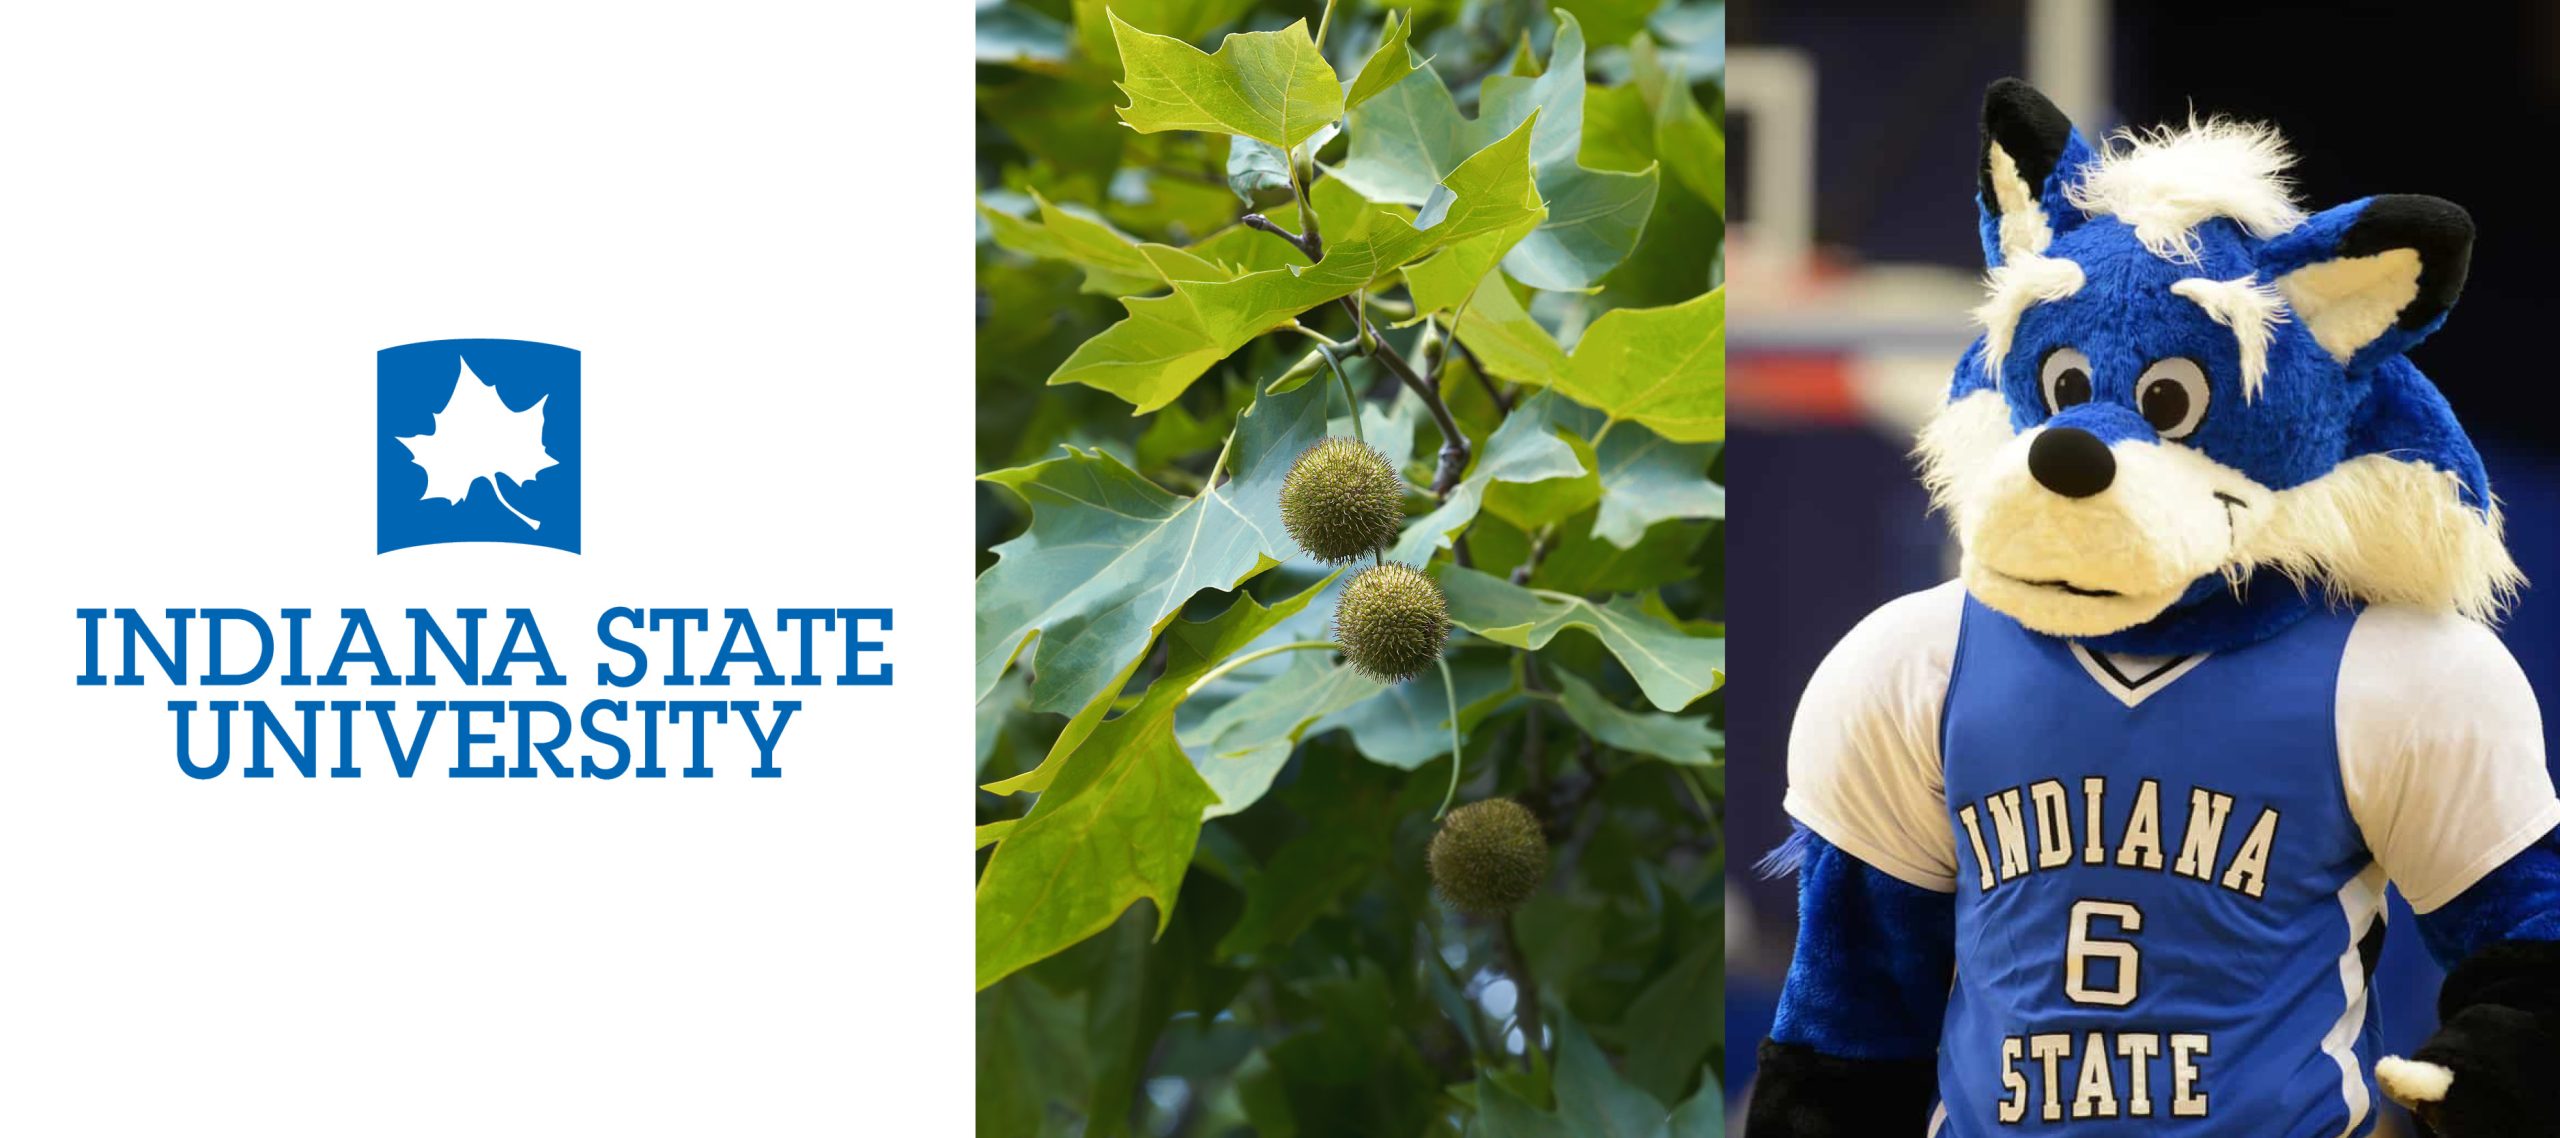 indiana state sycamoresSycamore leaf logo of Indiana State University and the sycamore tree (Platanus occidentalis). Right: Sycamore Sam, Indiana State's mascot.